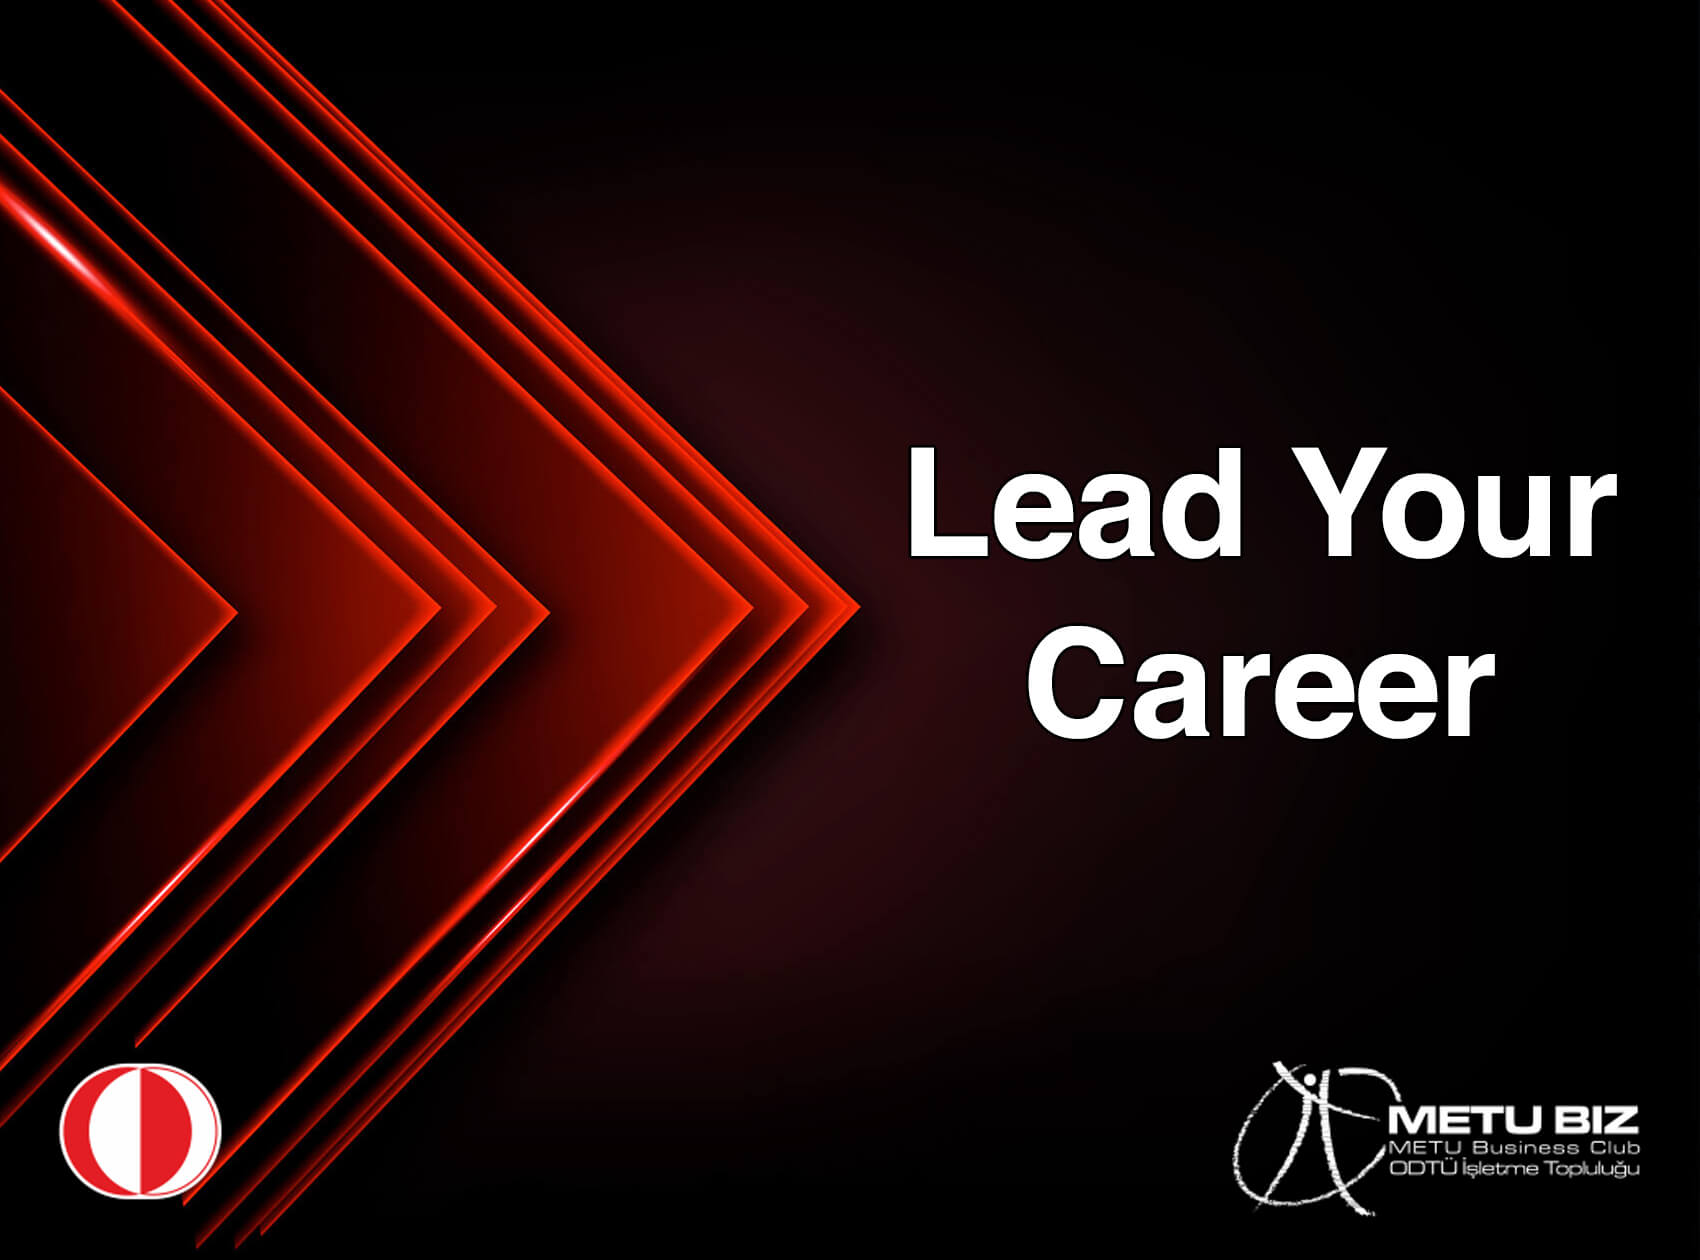 Lead Your Career